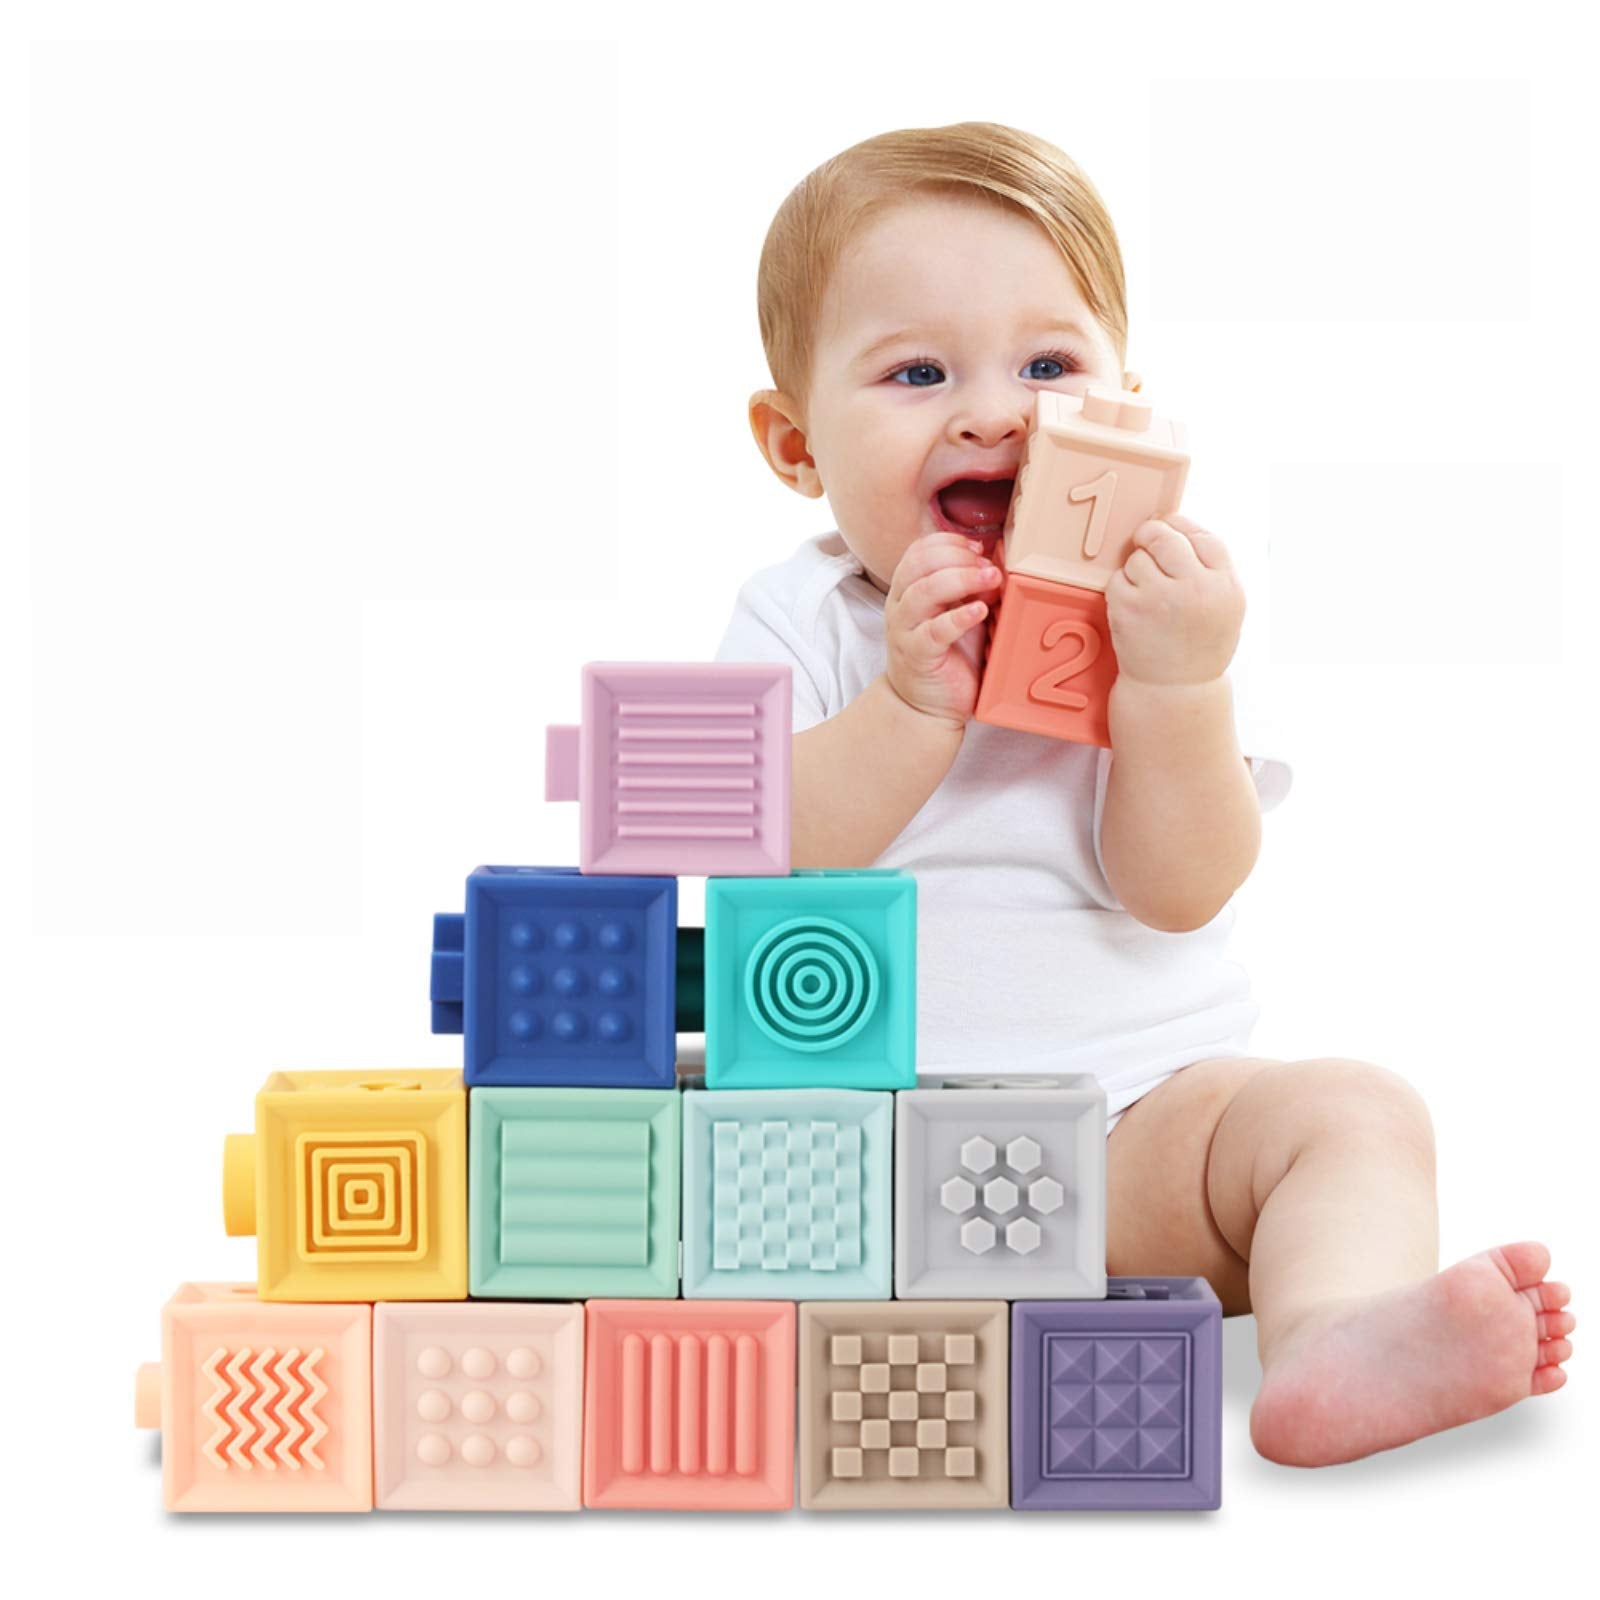 tumama Baby Blocks Soft Building Blocks Baby Toys Teethers Toy Educational Squeeze Play with Numbers Animals Shapes Textures 6 Months and Up 12PCS